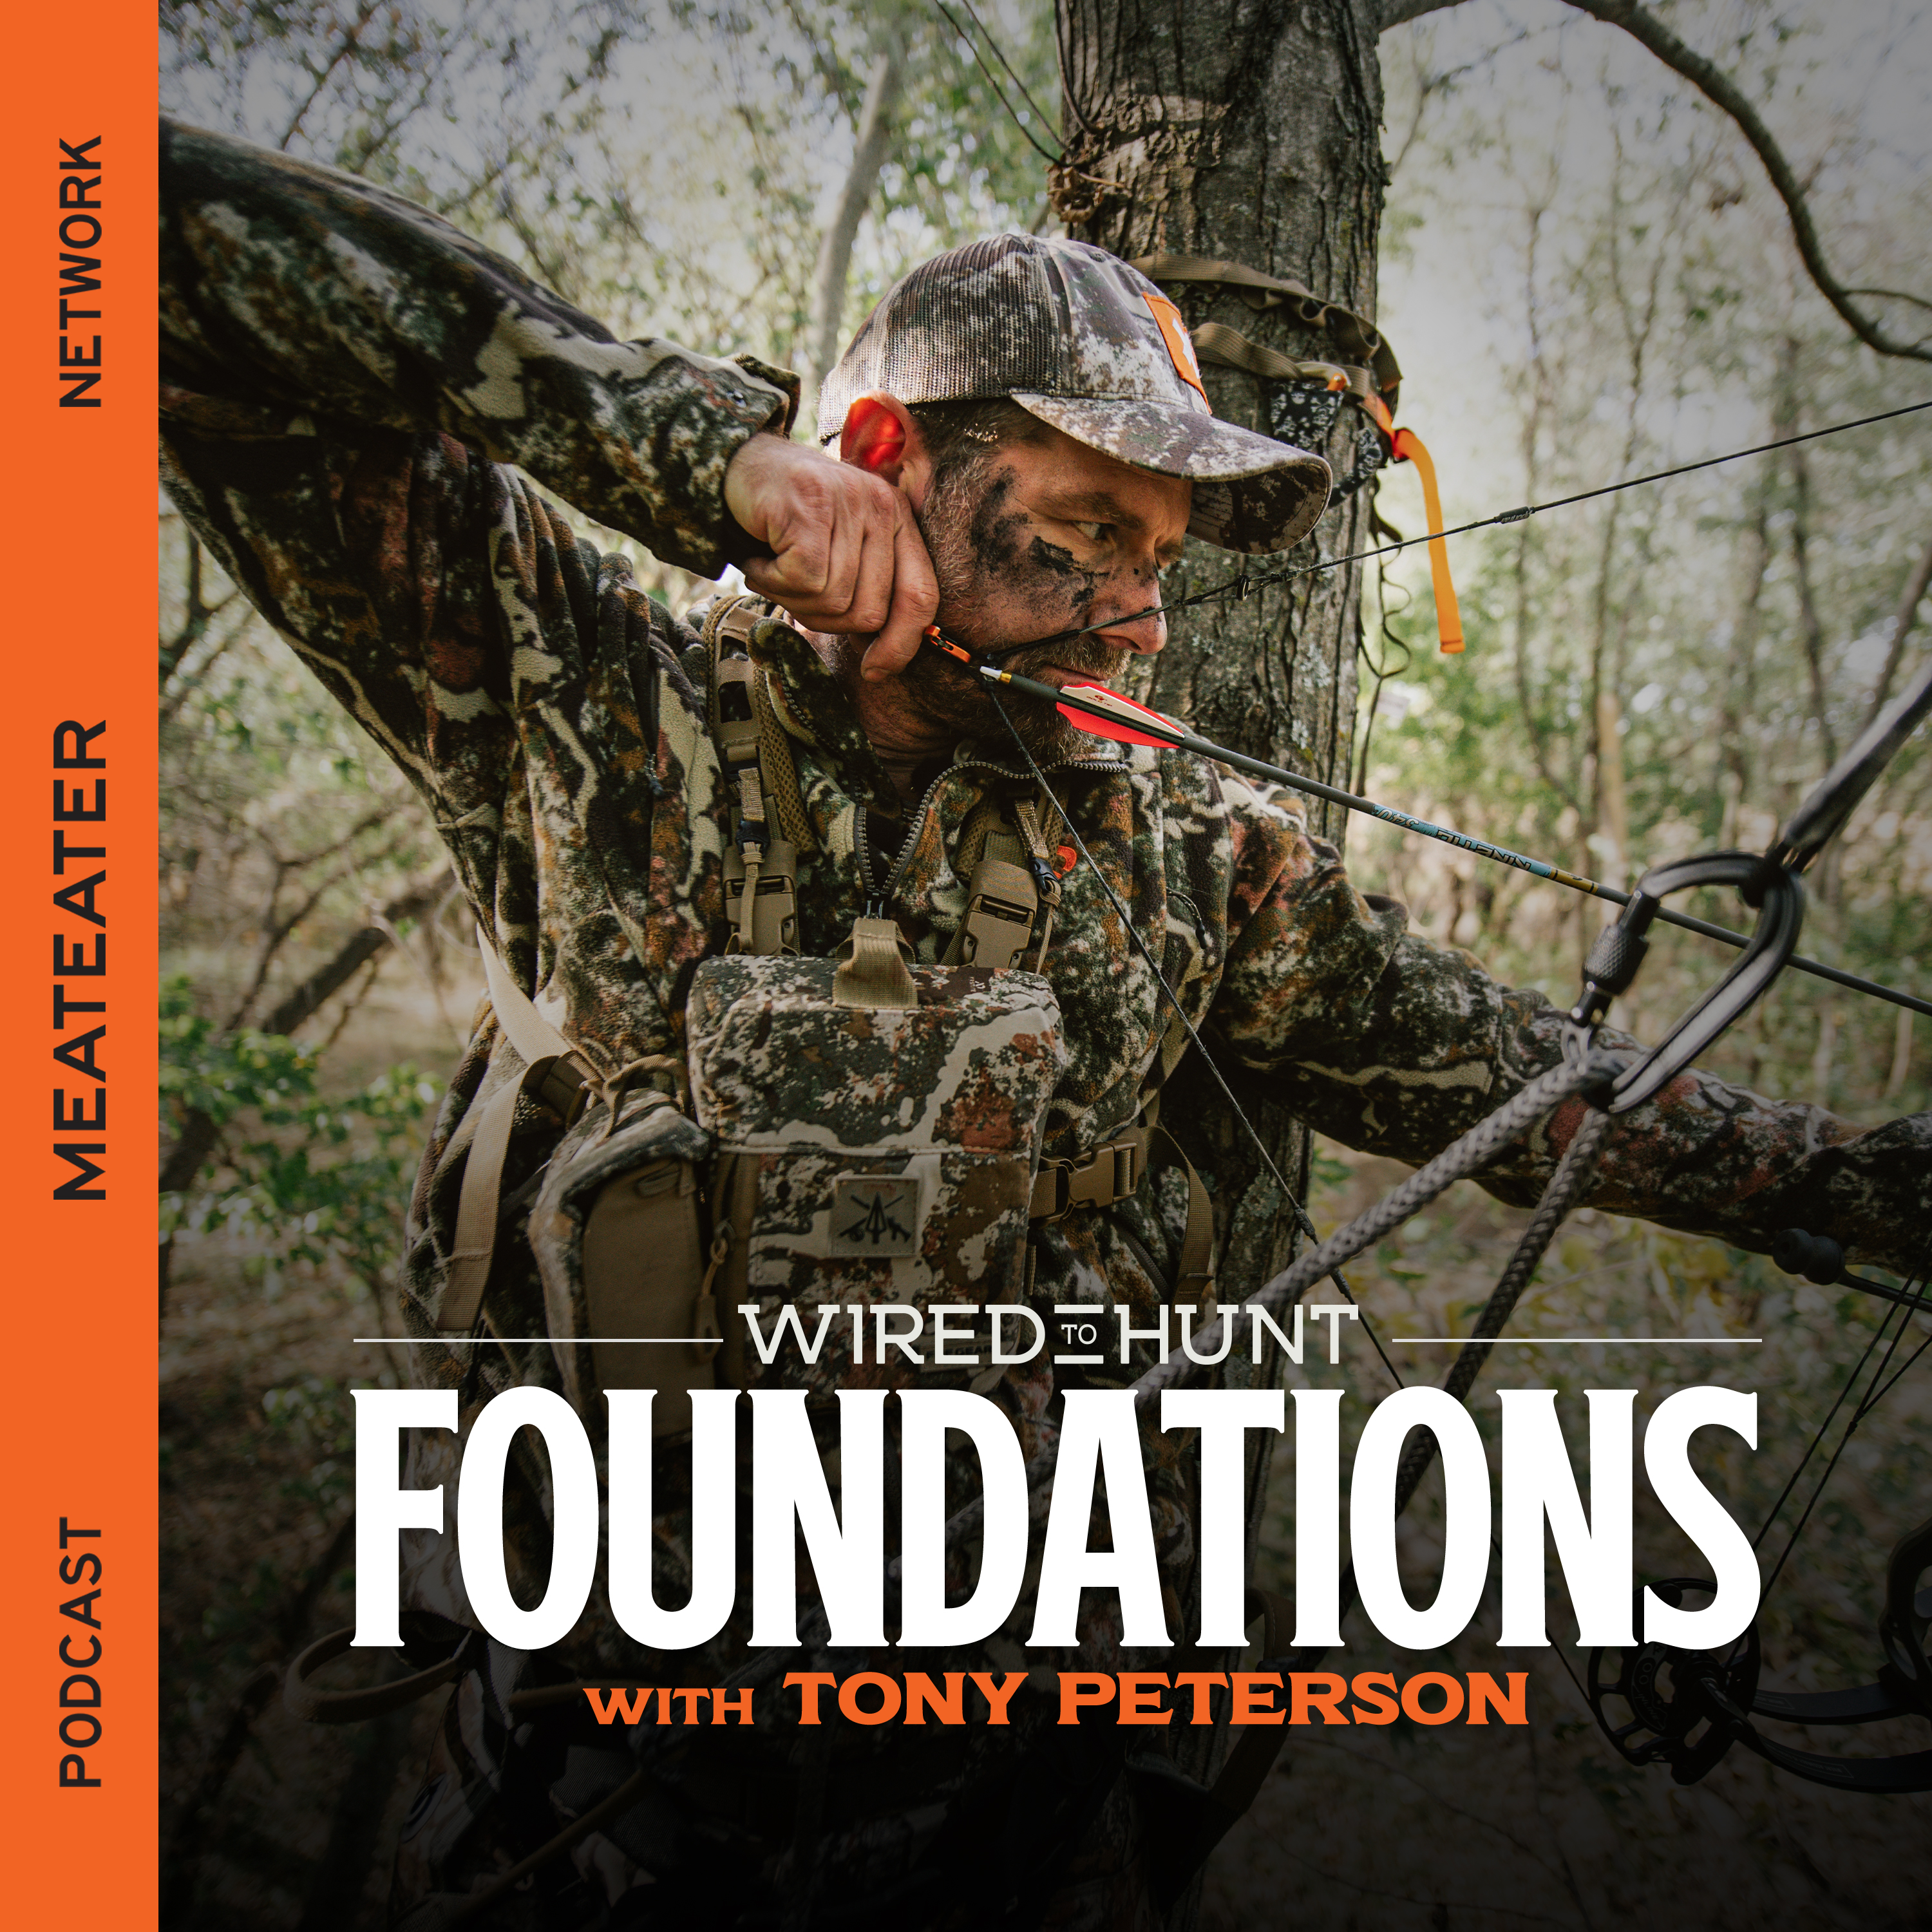 Ep. 770: Foundations - How to Avoid Being Avoided by Whitetails